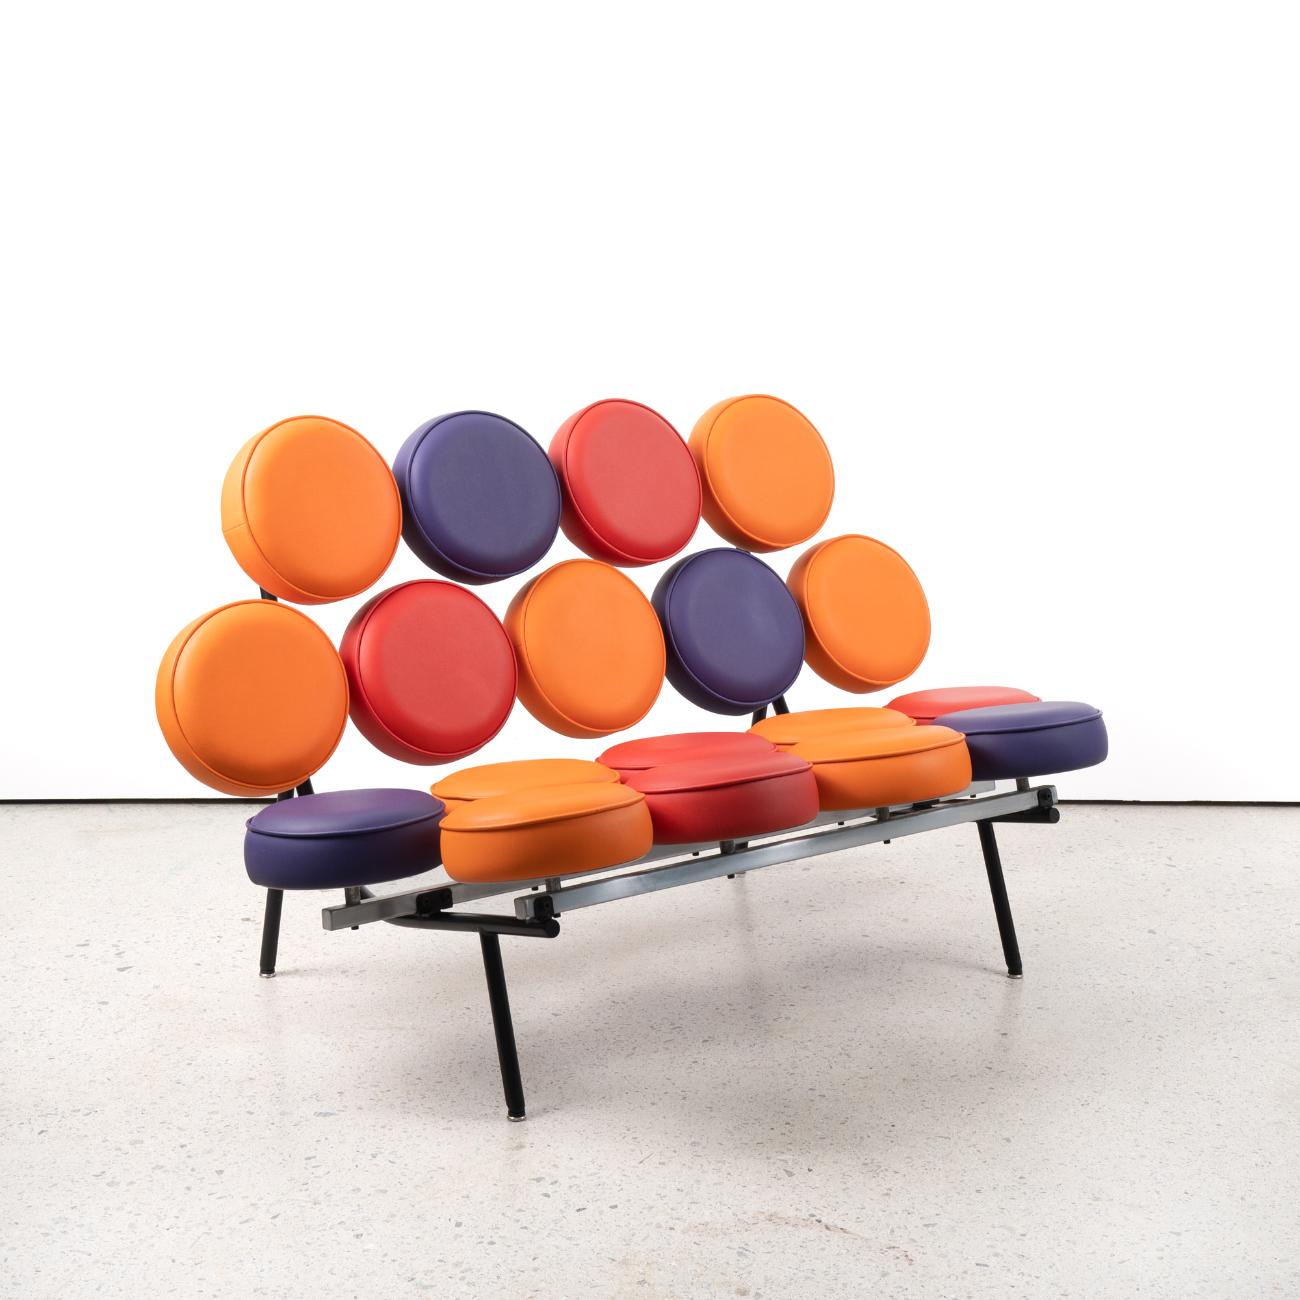 The icon of post-war design, the Marshmallow sofa epitomizes an optimistic and heroic moment in American history. Designed by Irving Harper and George Nelson in 1954-56, the sofa breaks with upholstered furniture forms in a dramatic way. 
The seat